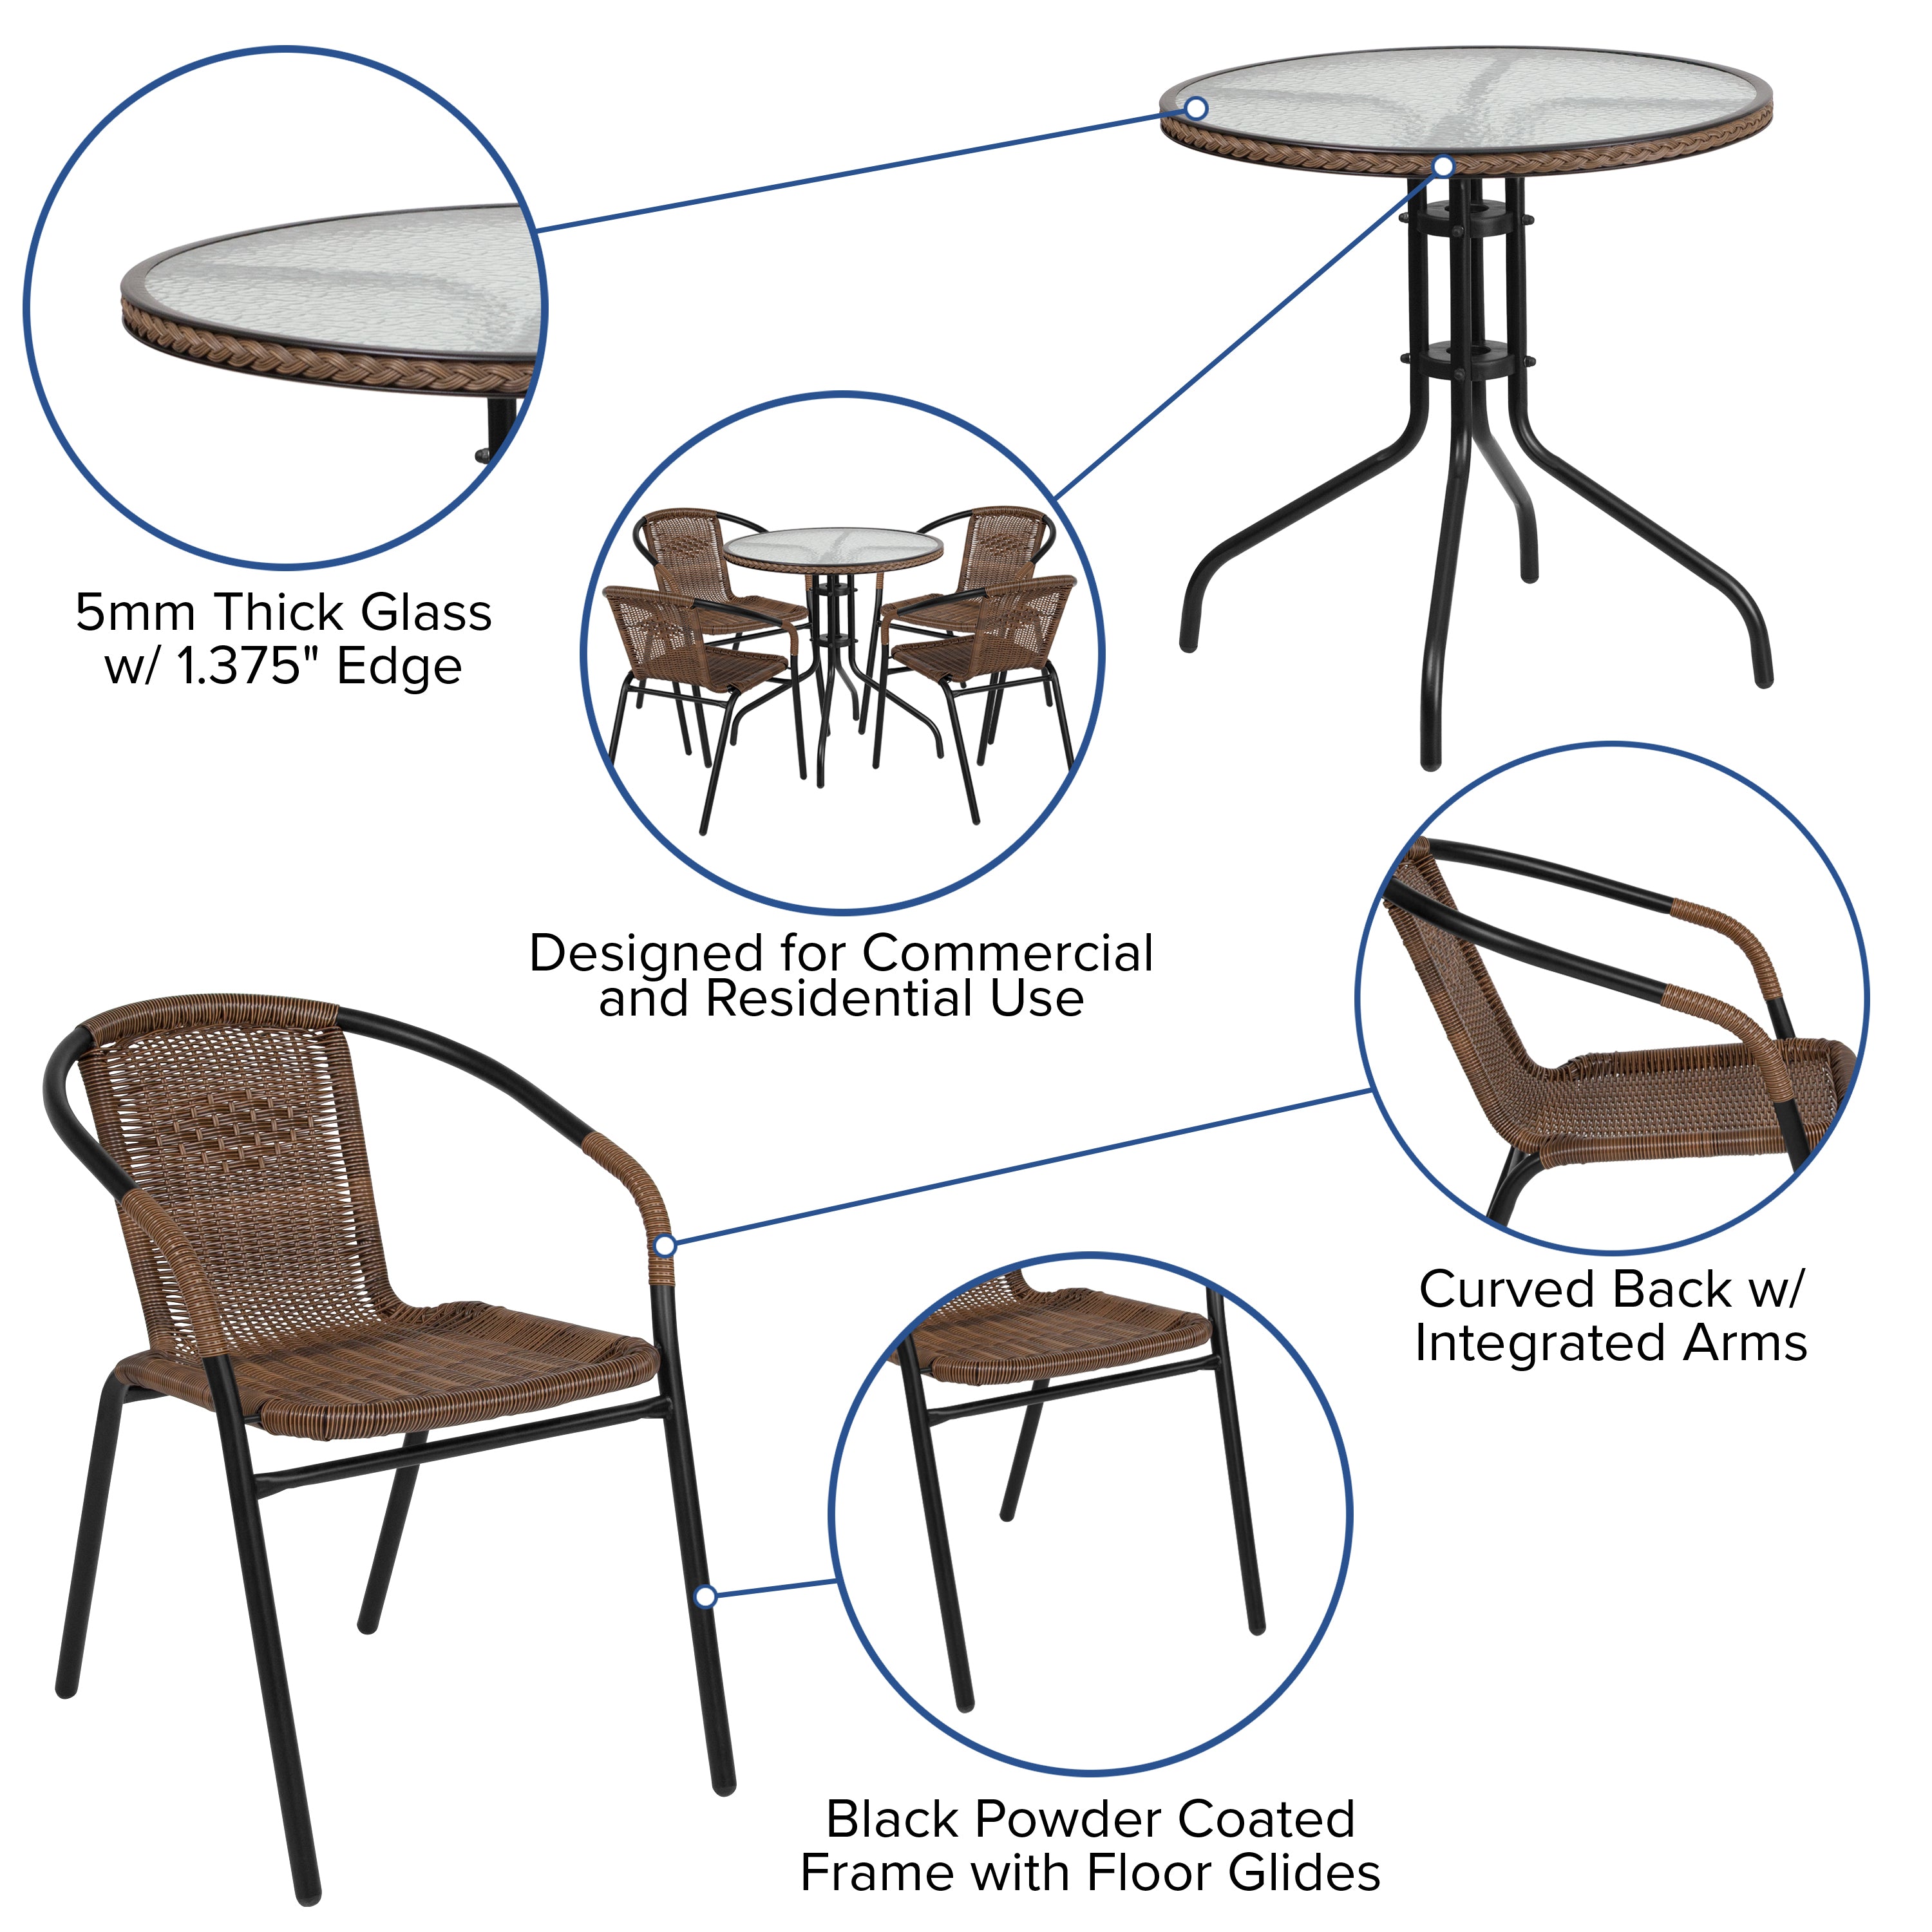 Barker 28'' Round Glass Metal Table with Rattan Edging and 4 Rattan Stack Chairs-Indoor/Outdoor Dining Sets-Flash Furniture-Wall2Wall Furnishings